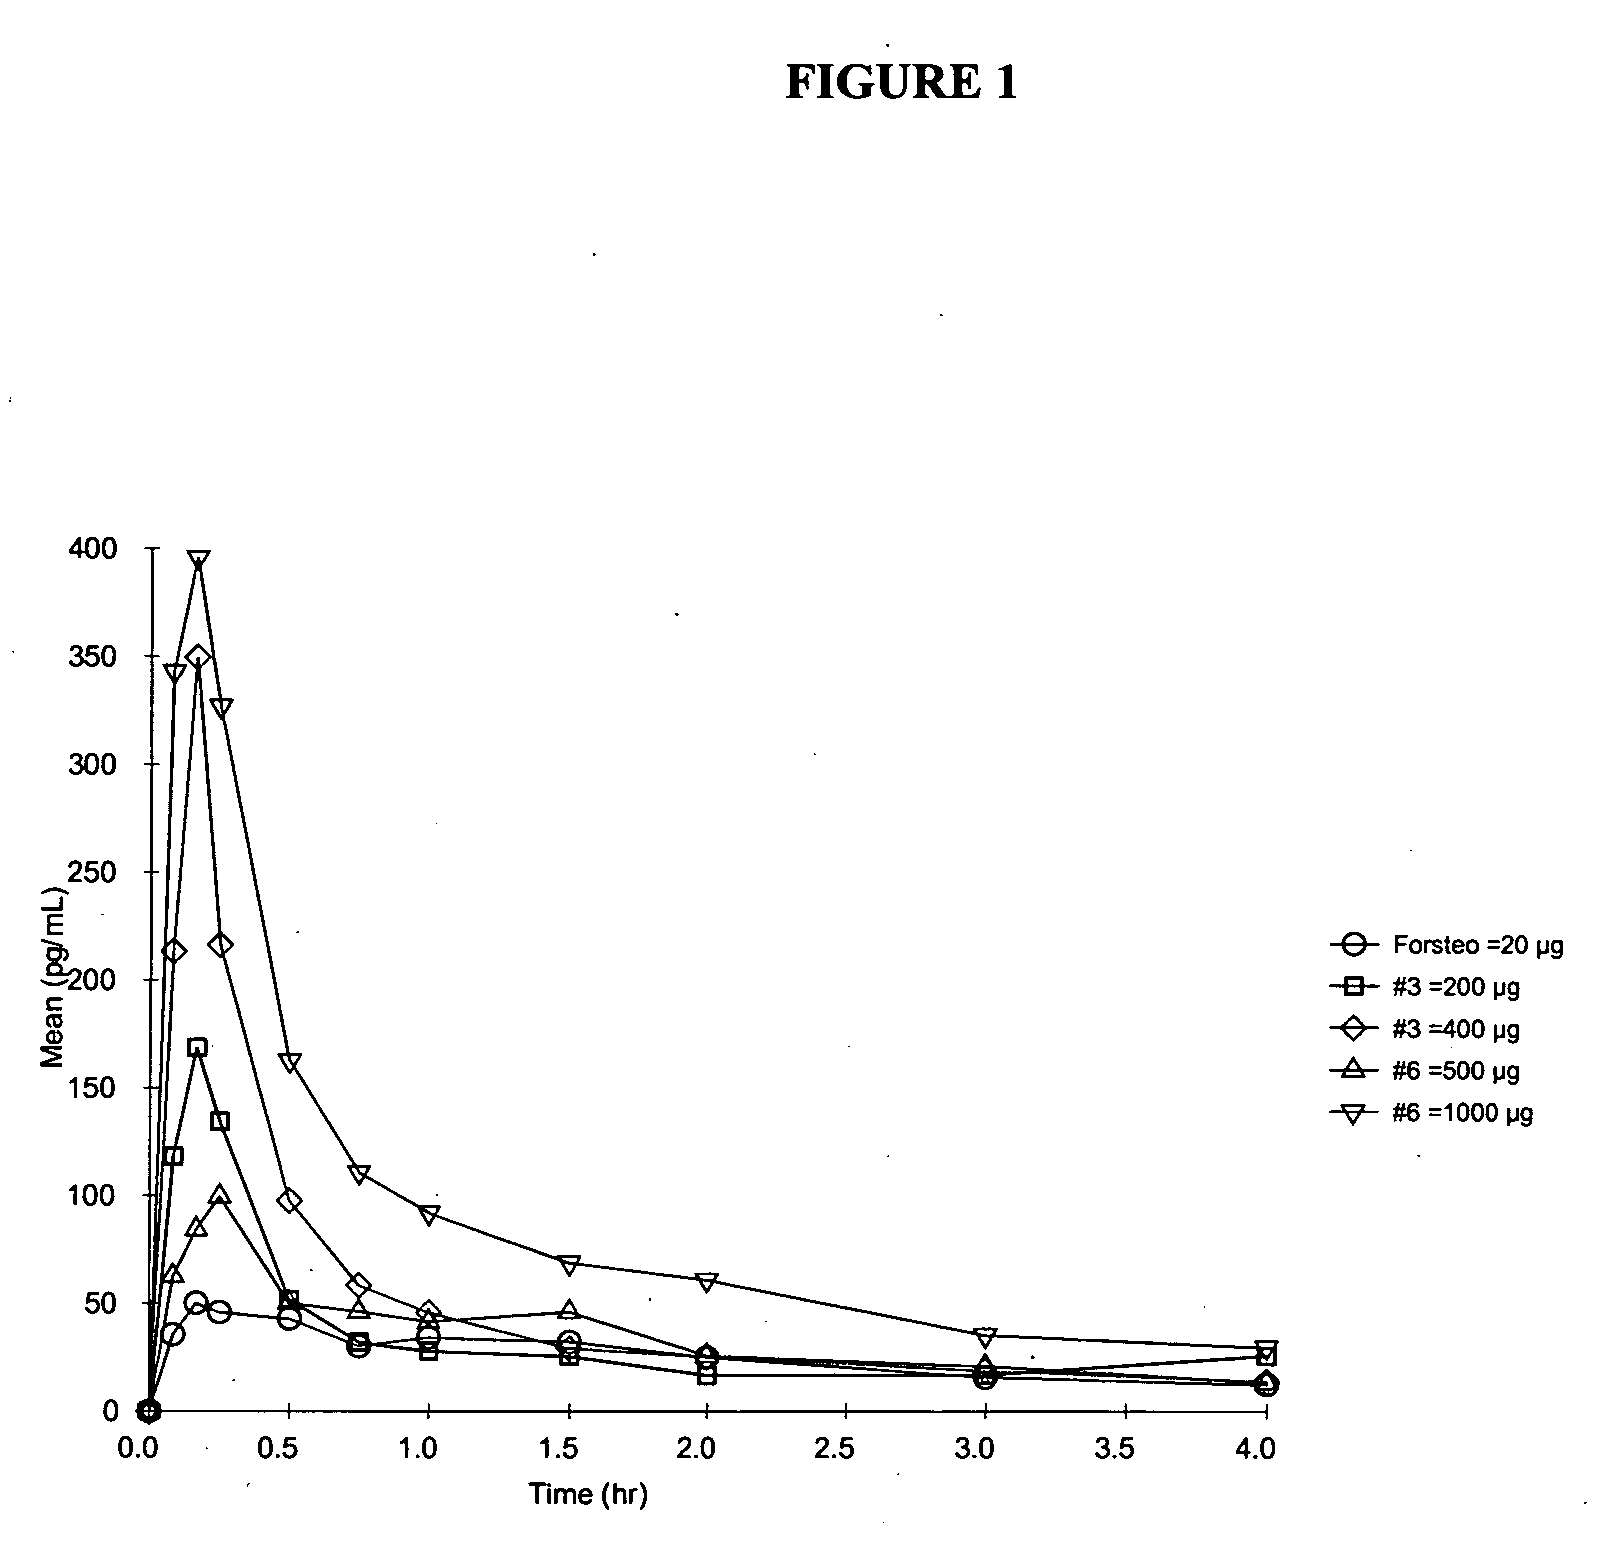 Stable pharmaceutical dosage forms of teriparatide